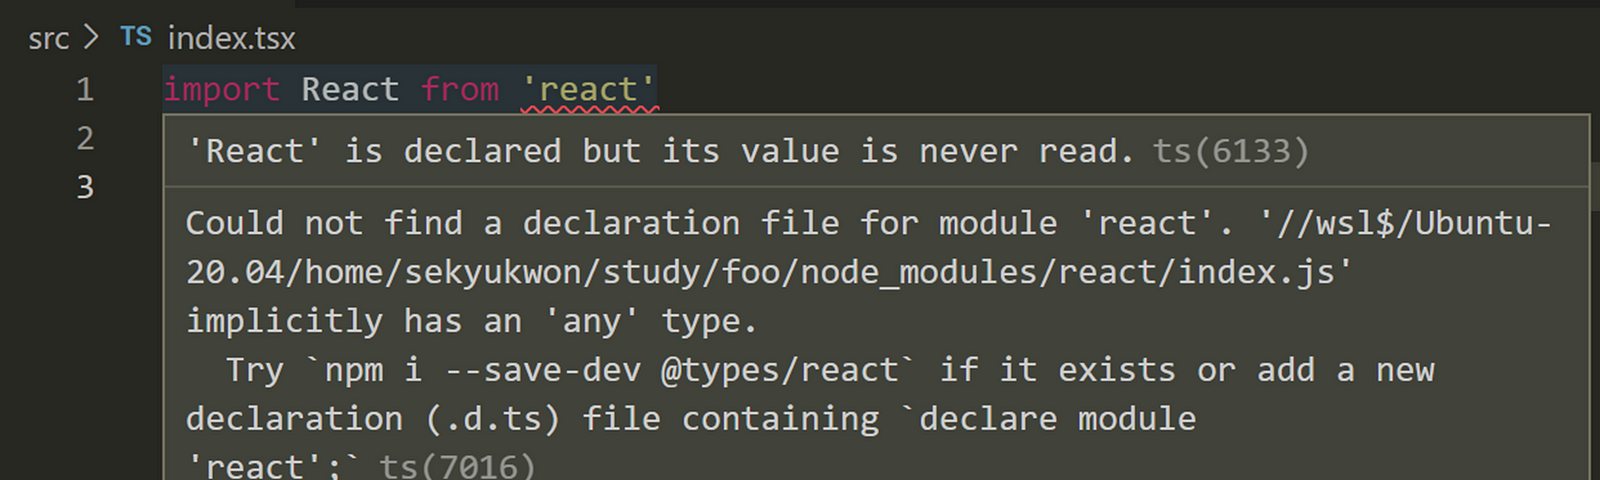 Could not find a declaration file for module ‘react’.